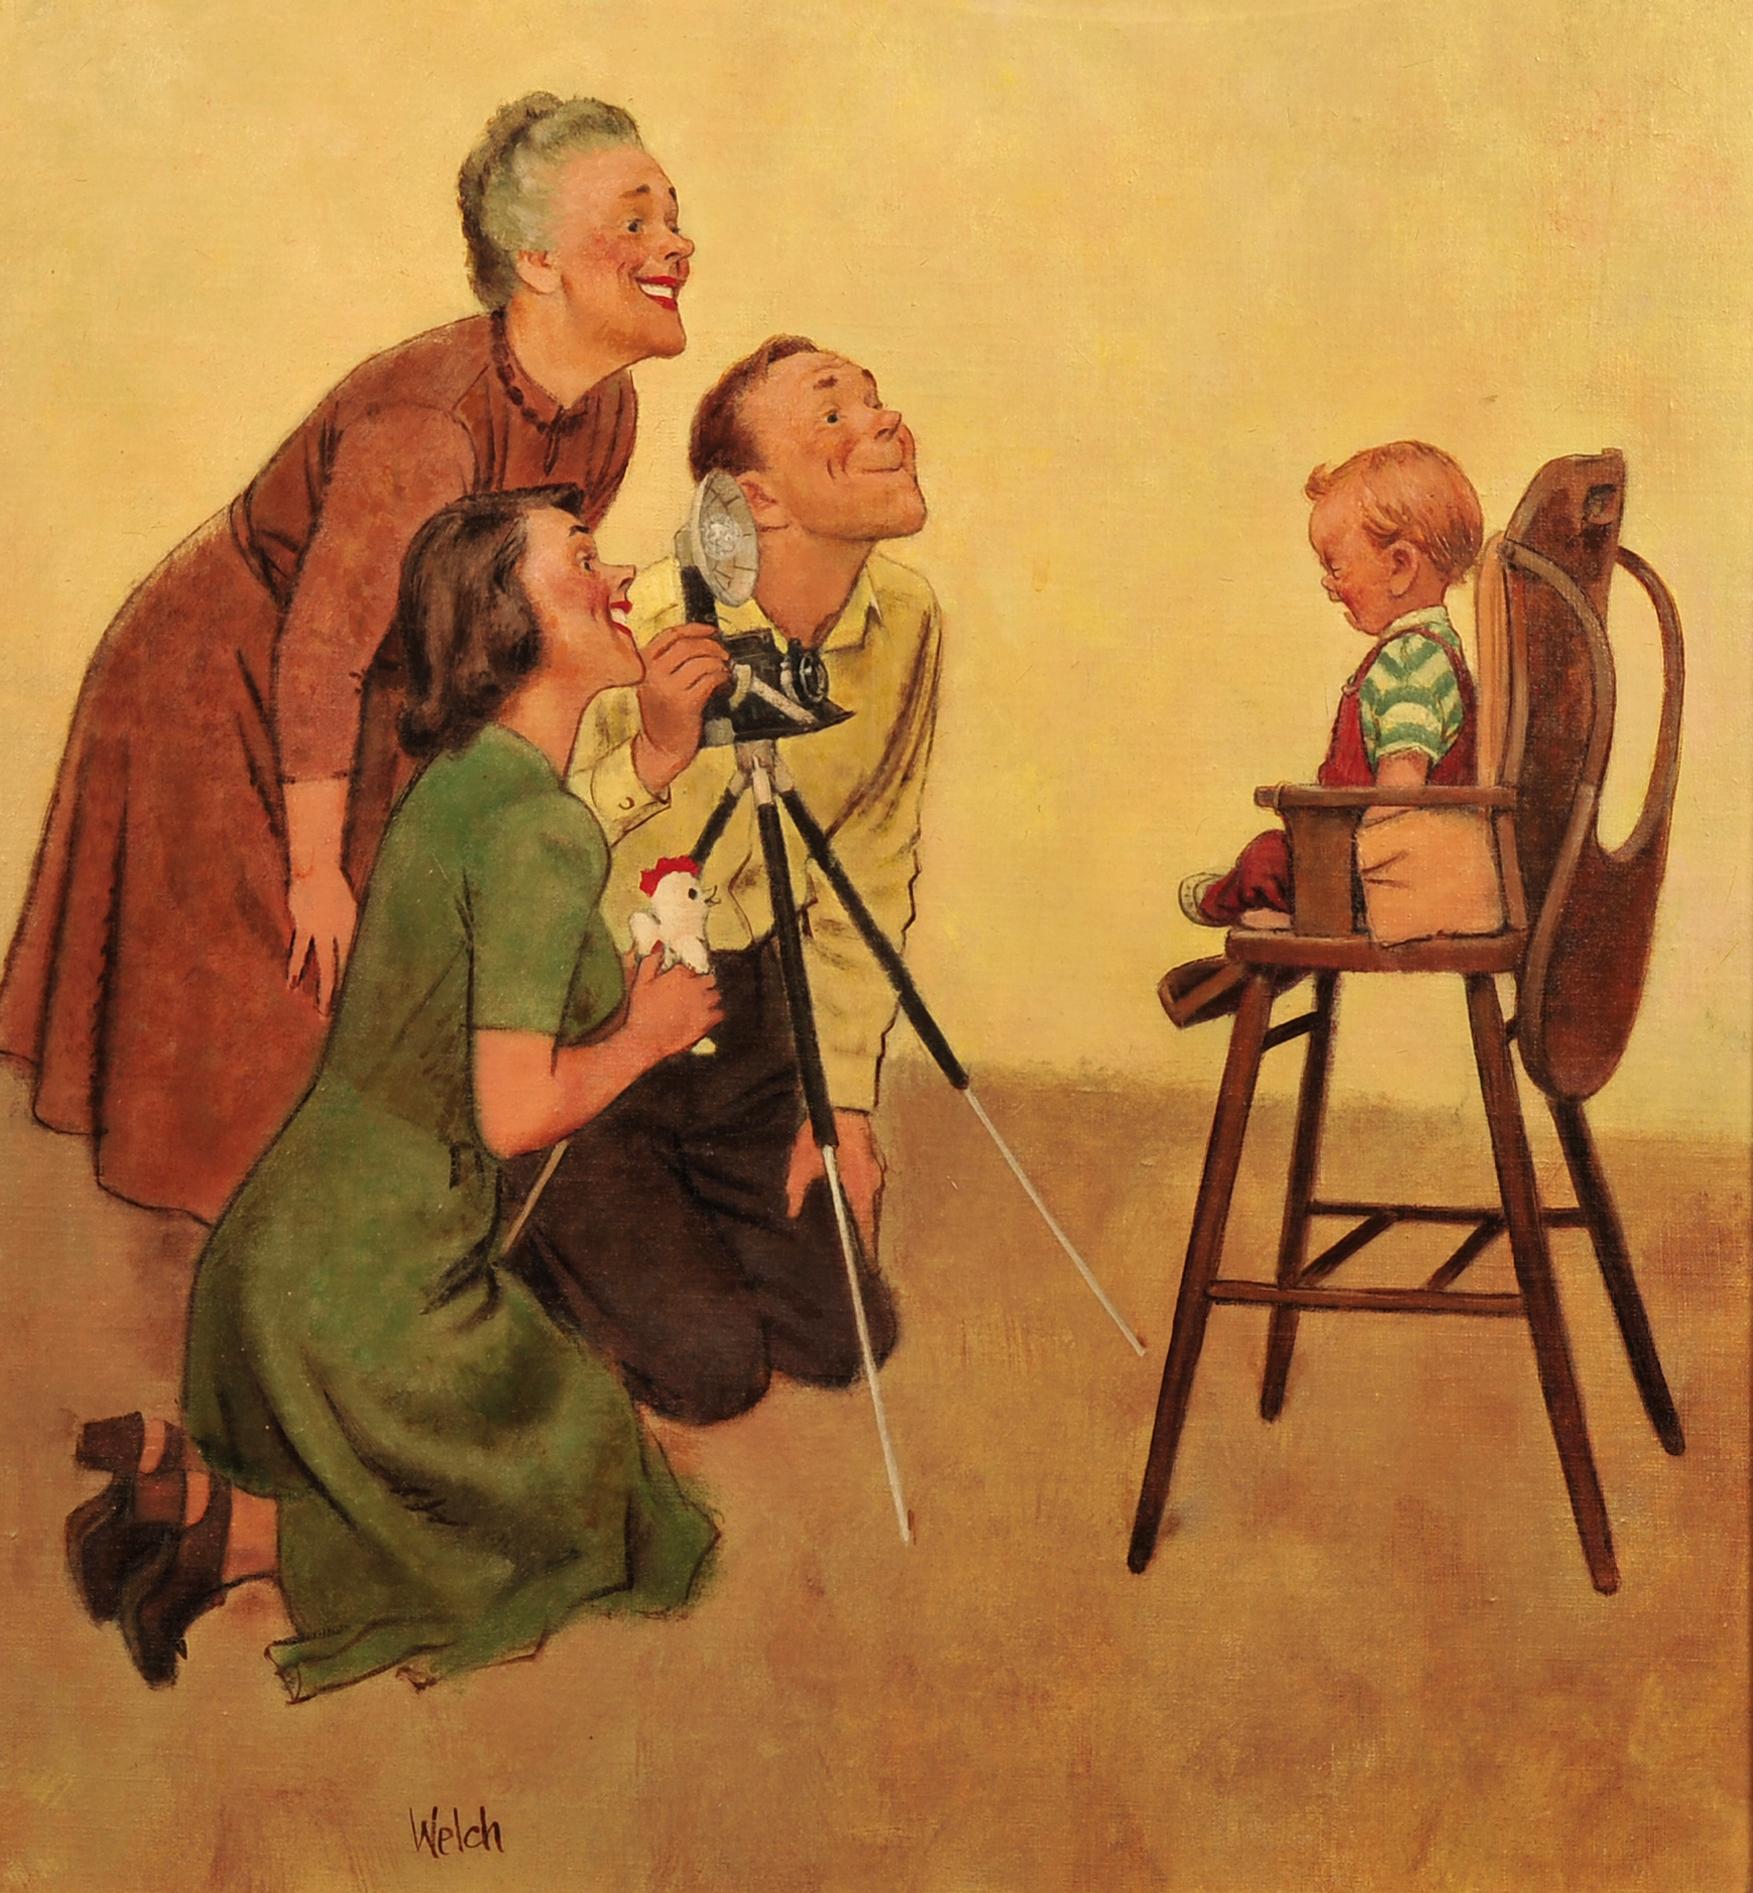 Trying To Make Baby Smile, Saturday Evening Post Cover - Painting by Jack Welch